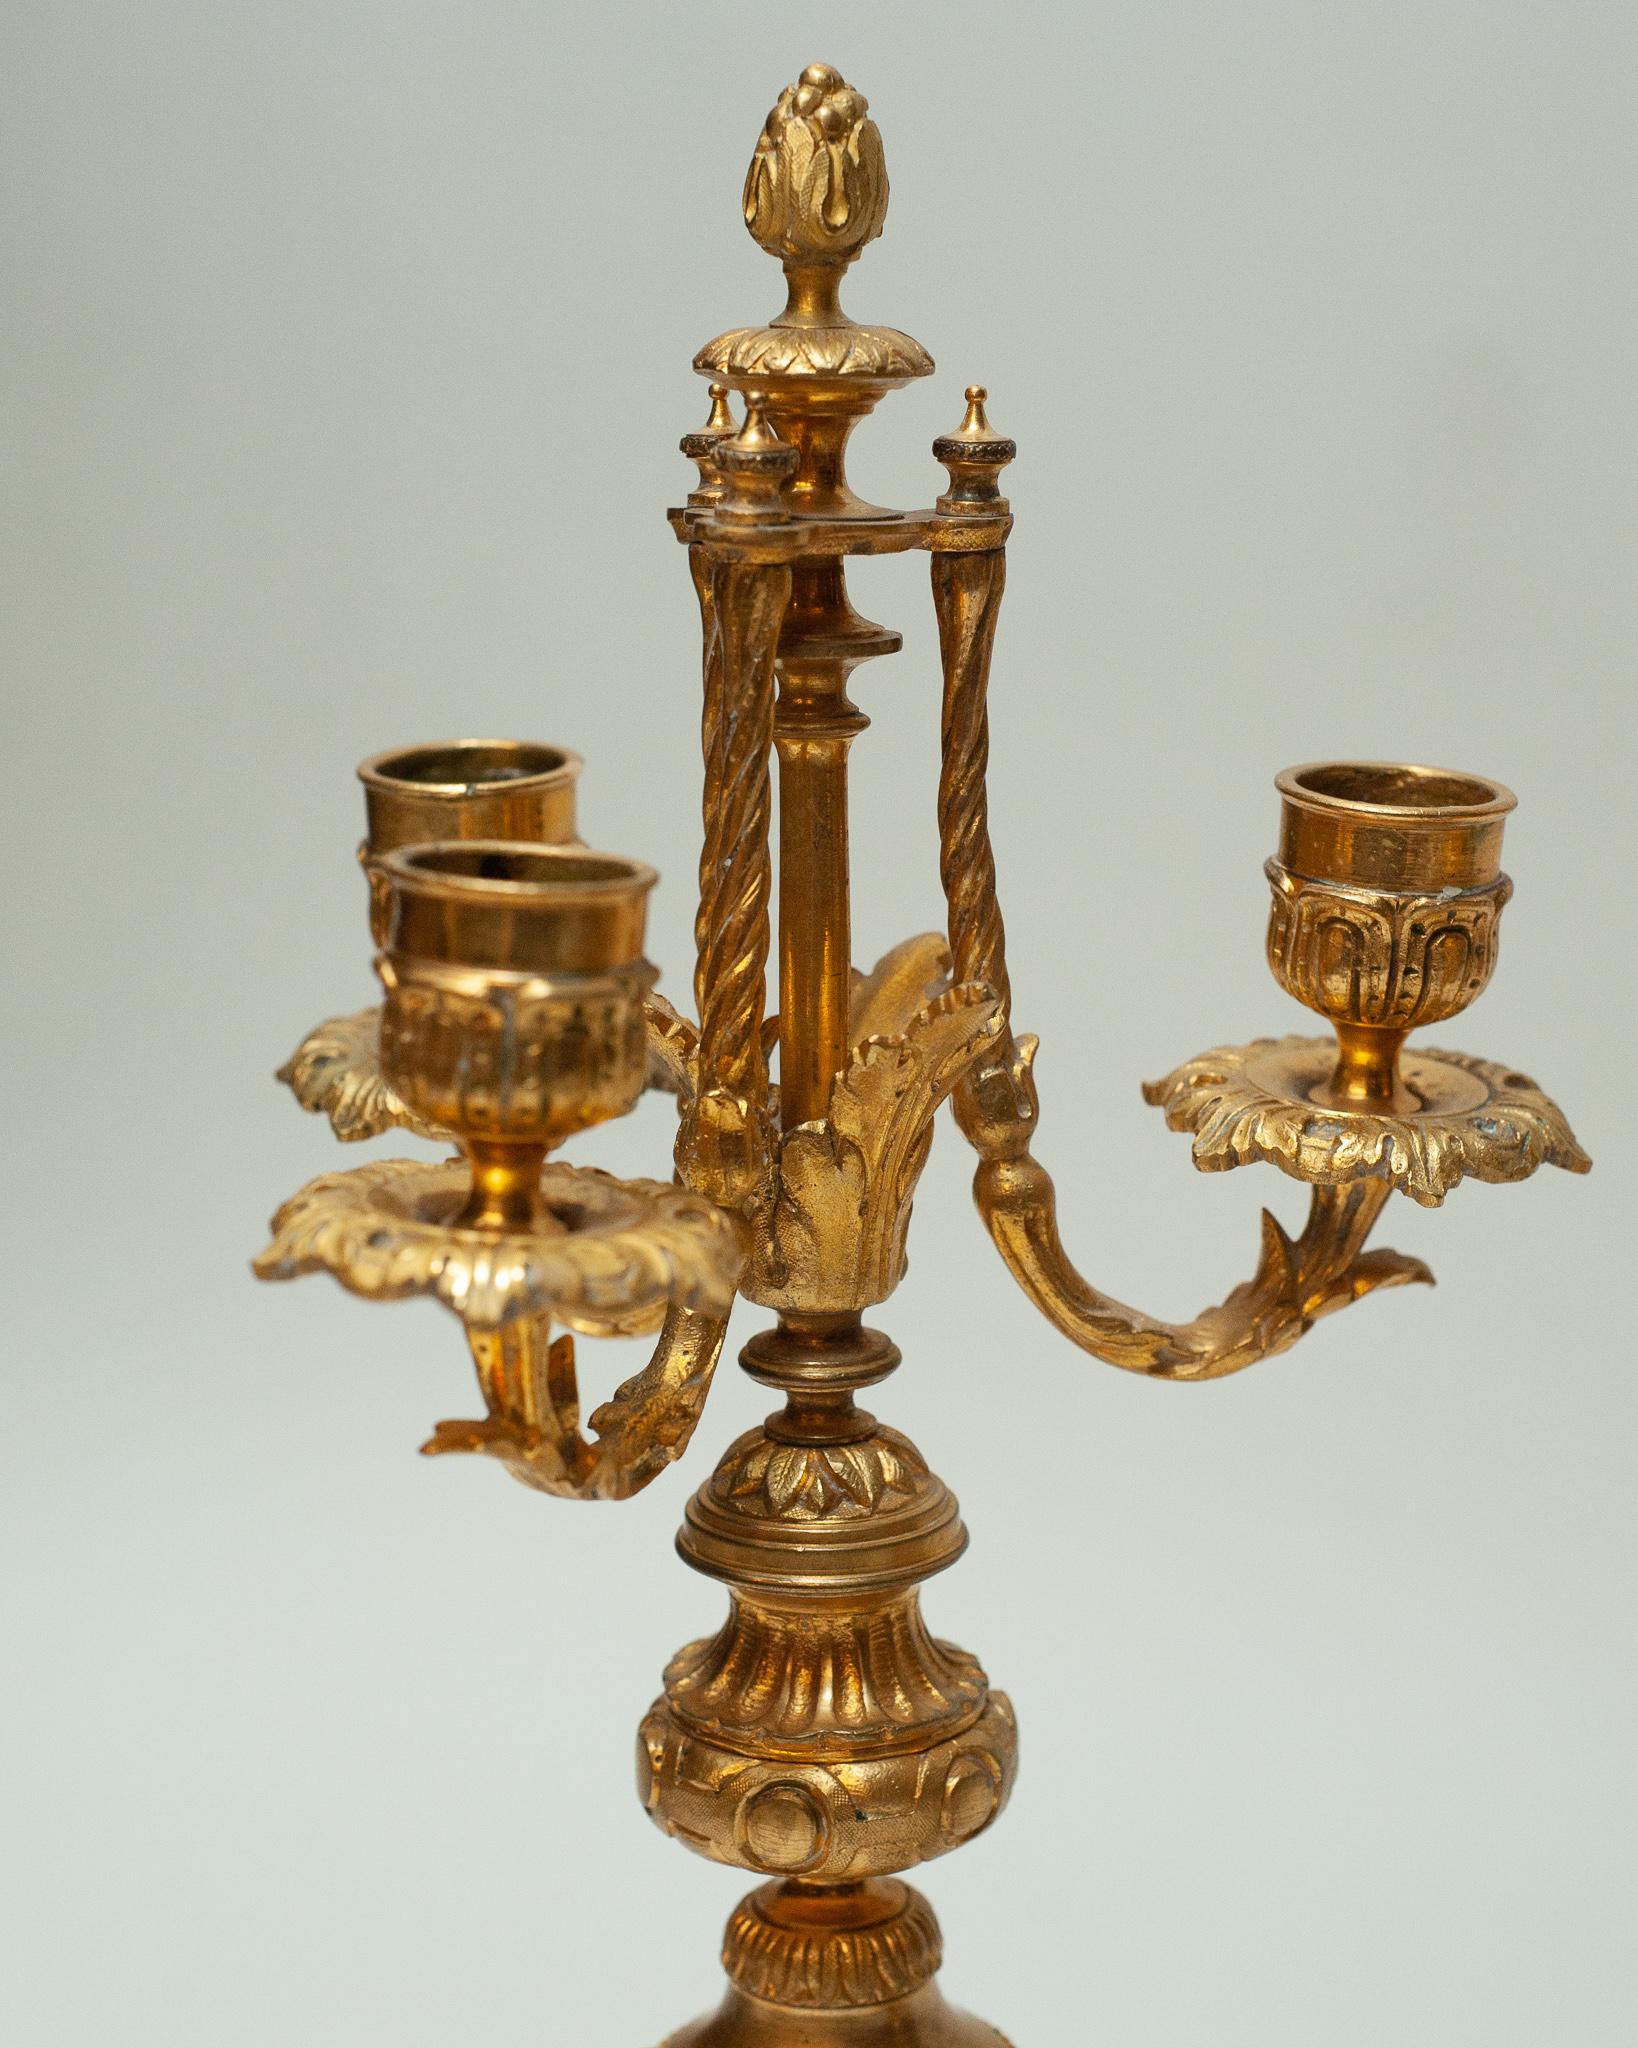 An exquisite pair of Antique pink porcelain and bronze candlesticks with gilt wood base, circa 1890.